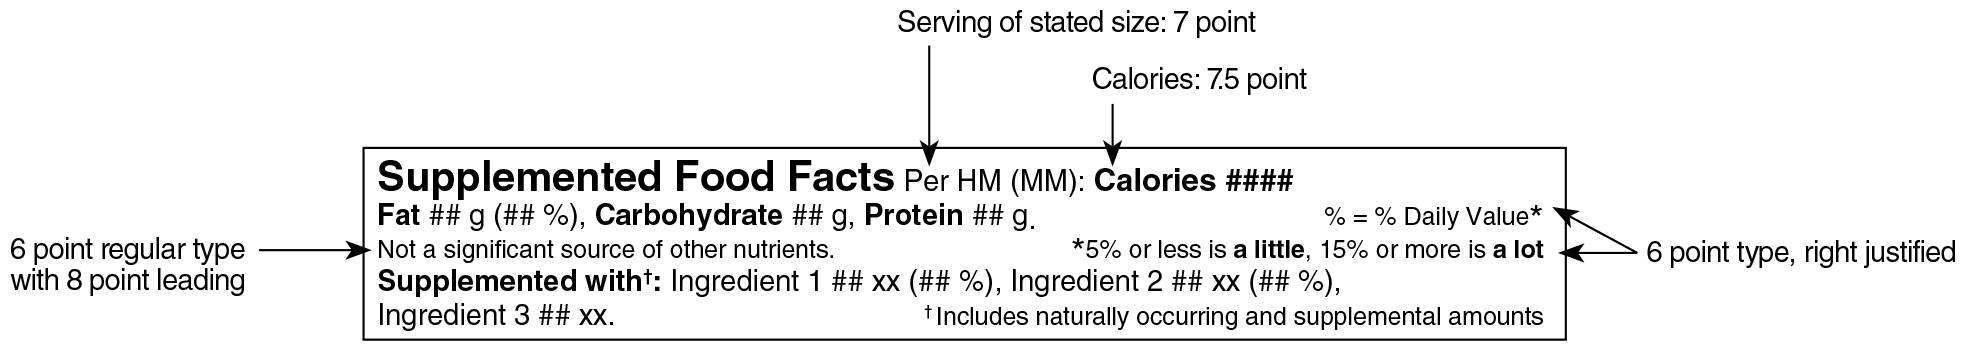 An English Supplemented Food Facts table in simplified linear format surrounded by specifications. Text version below.